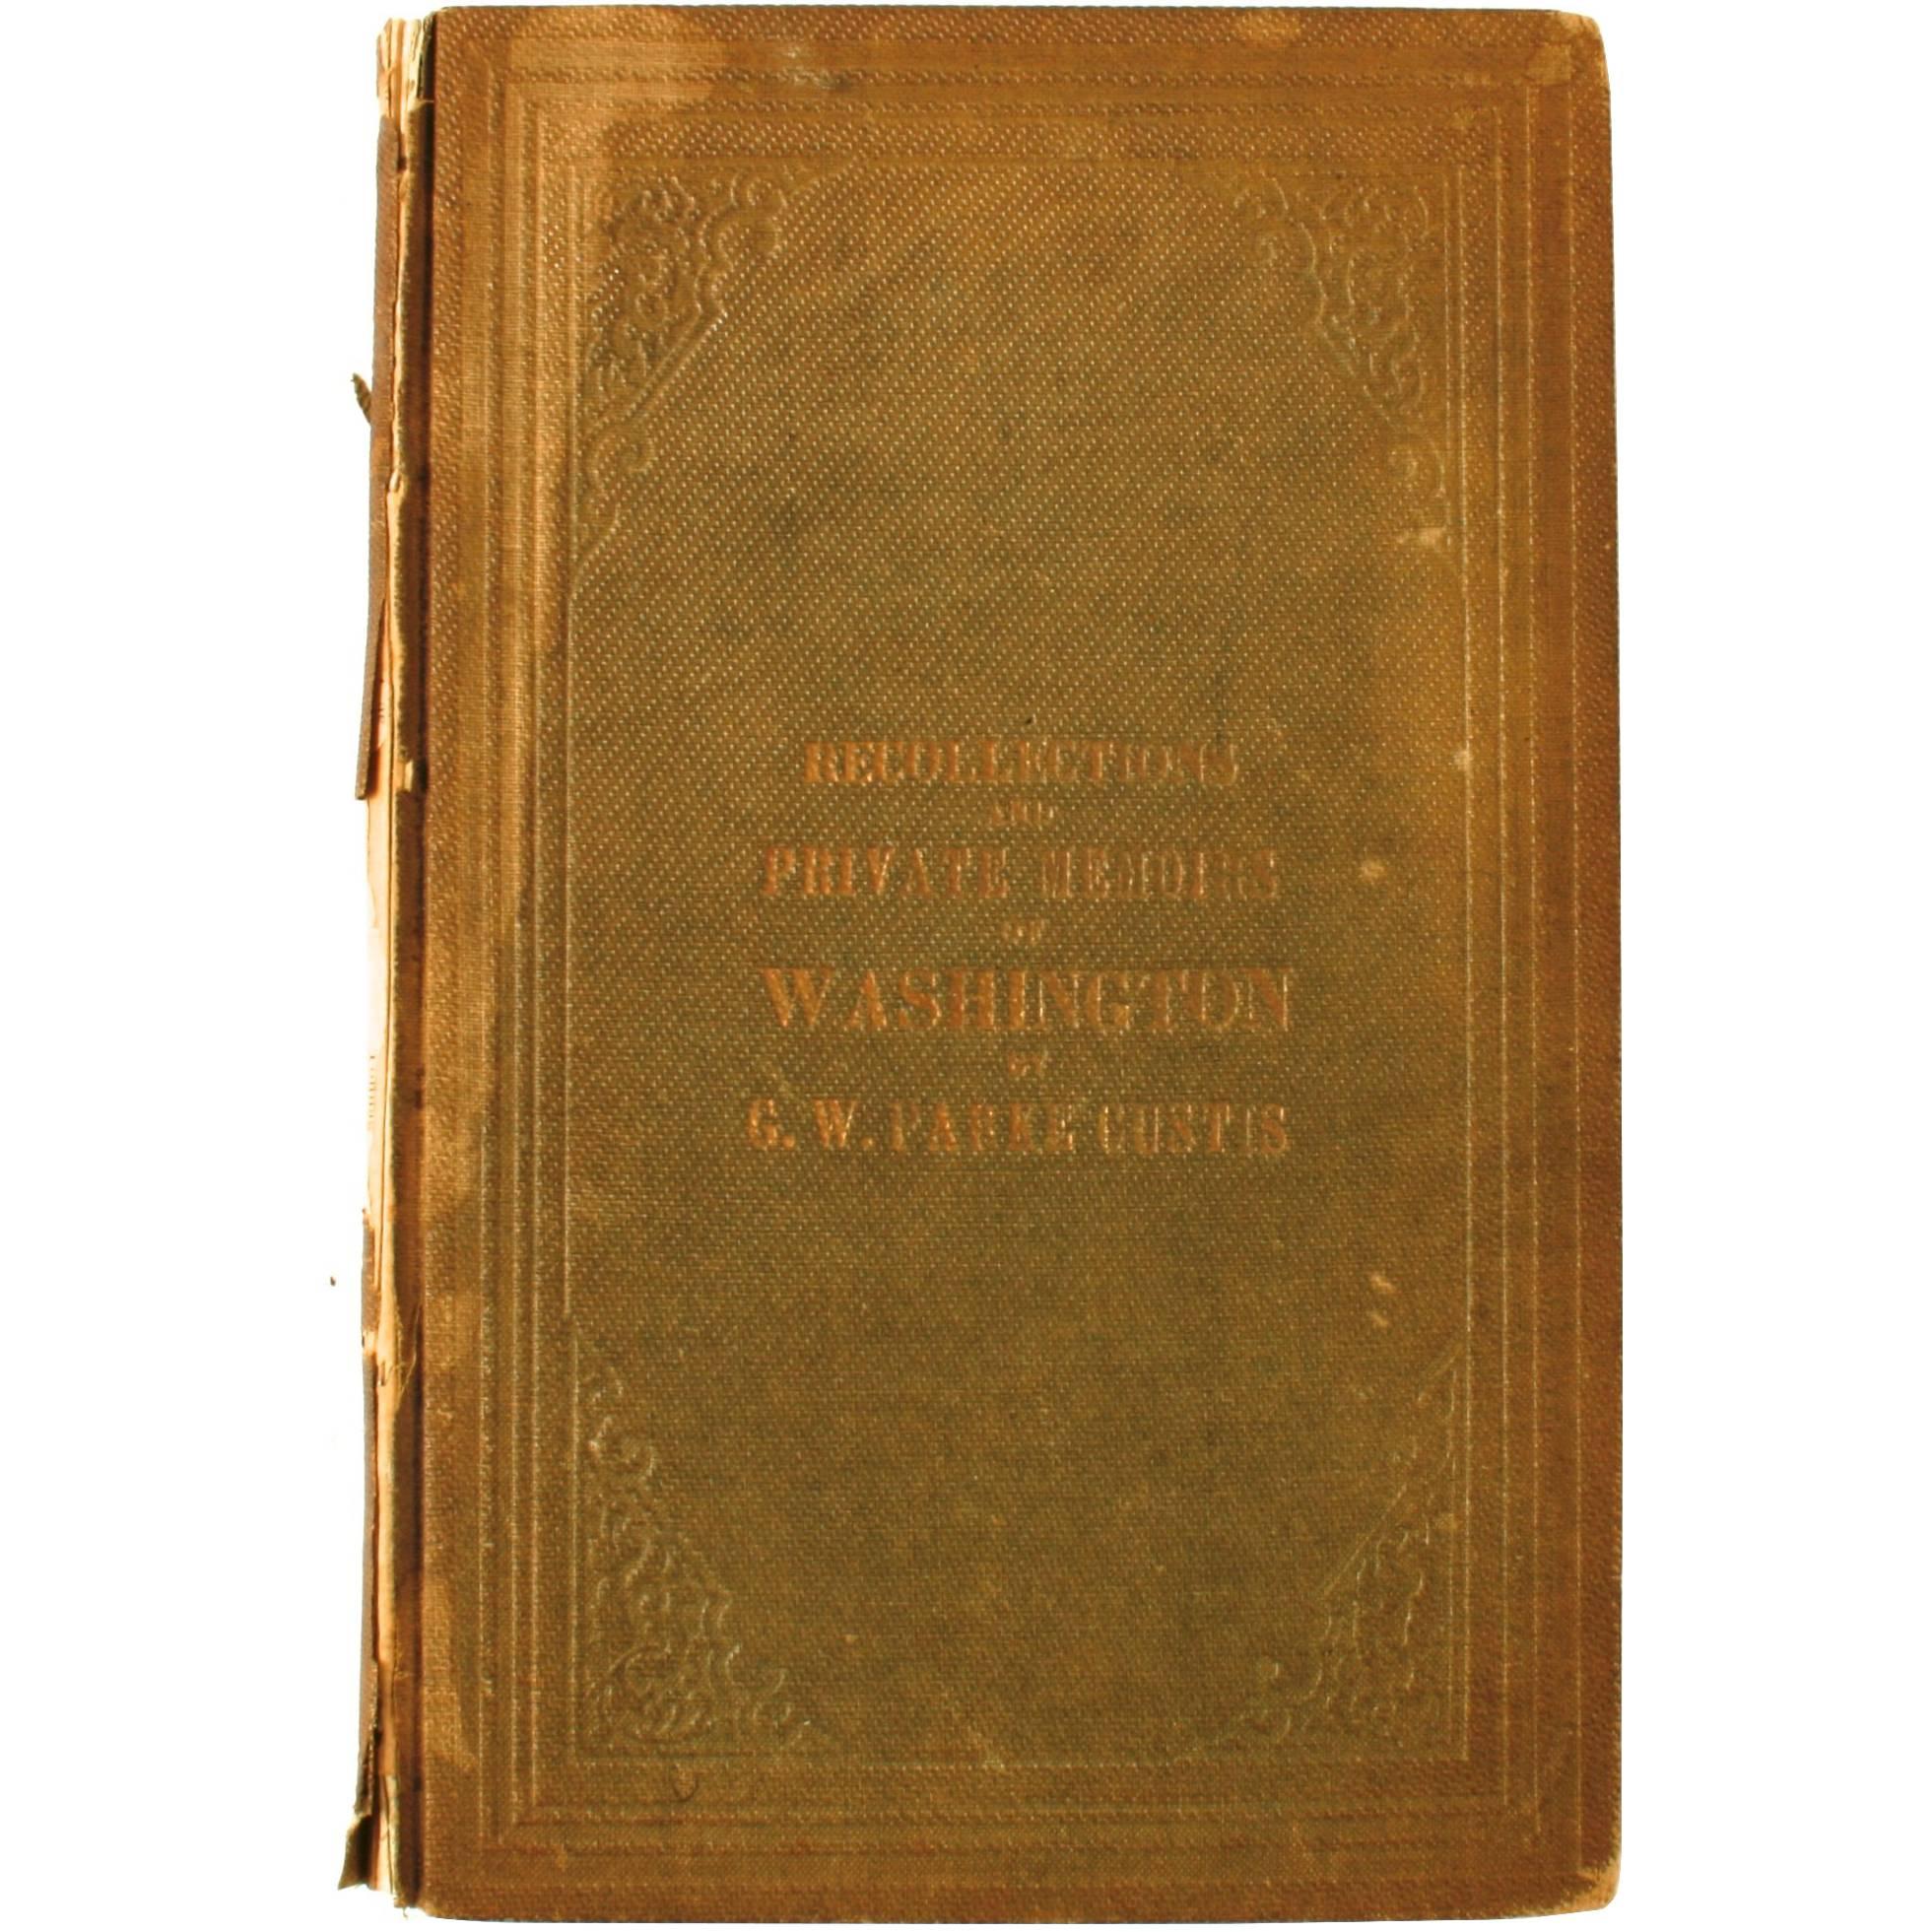 Recollections and Private Memoirs of Washington First Edition